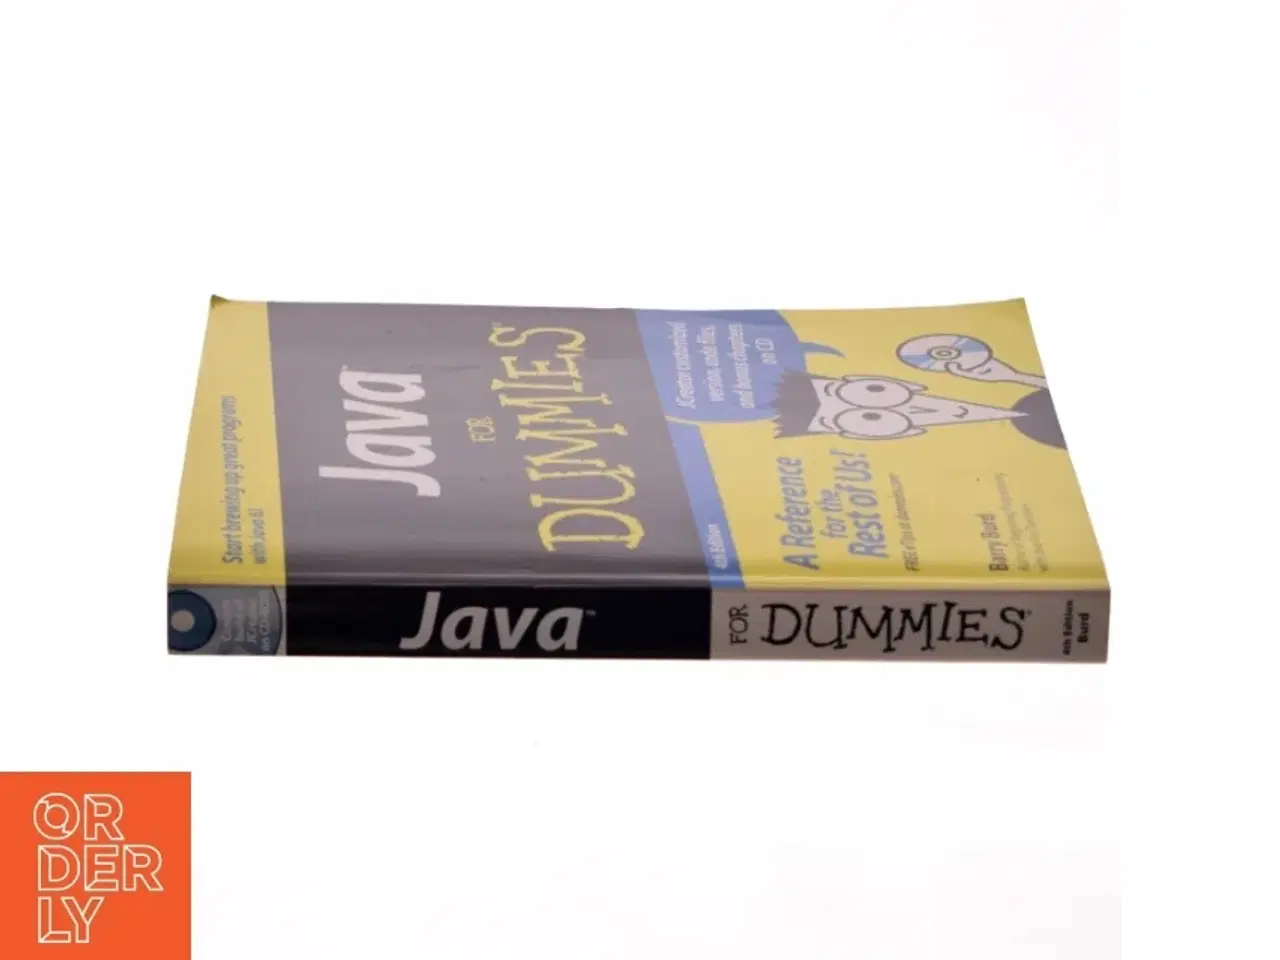 Billede 2 - Java for Dummies, 4th Edition fra Wiley